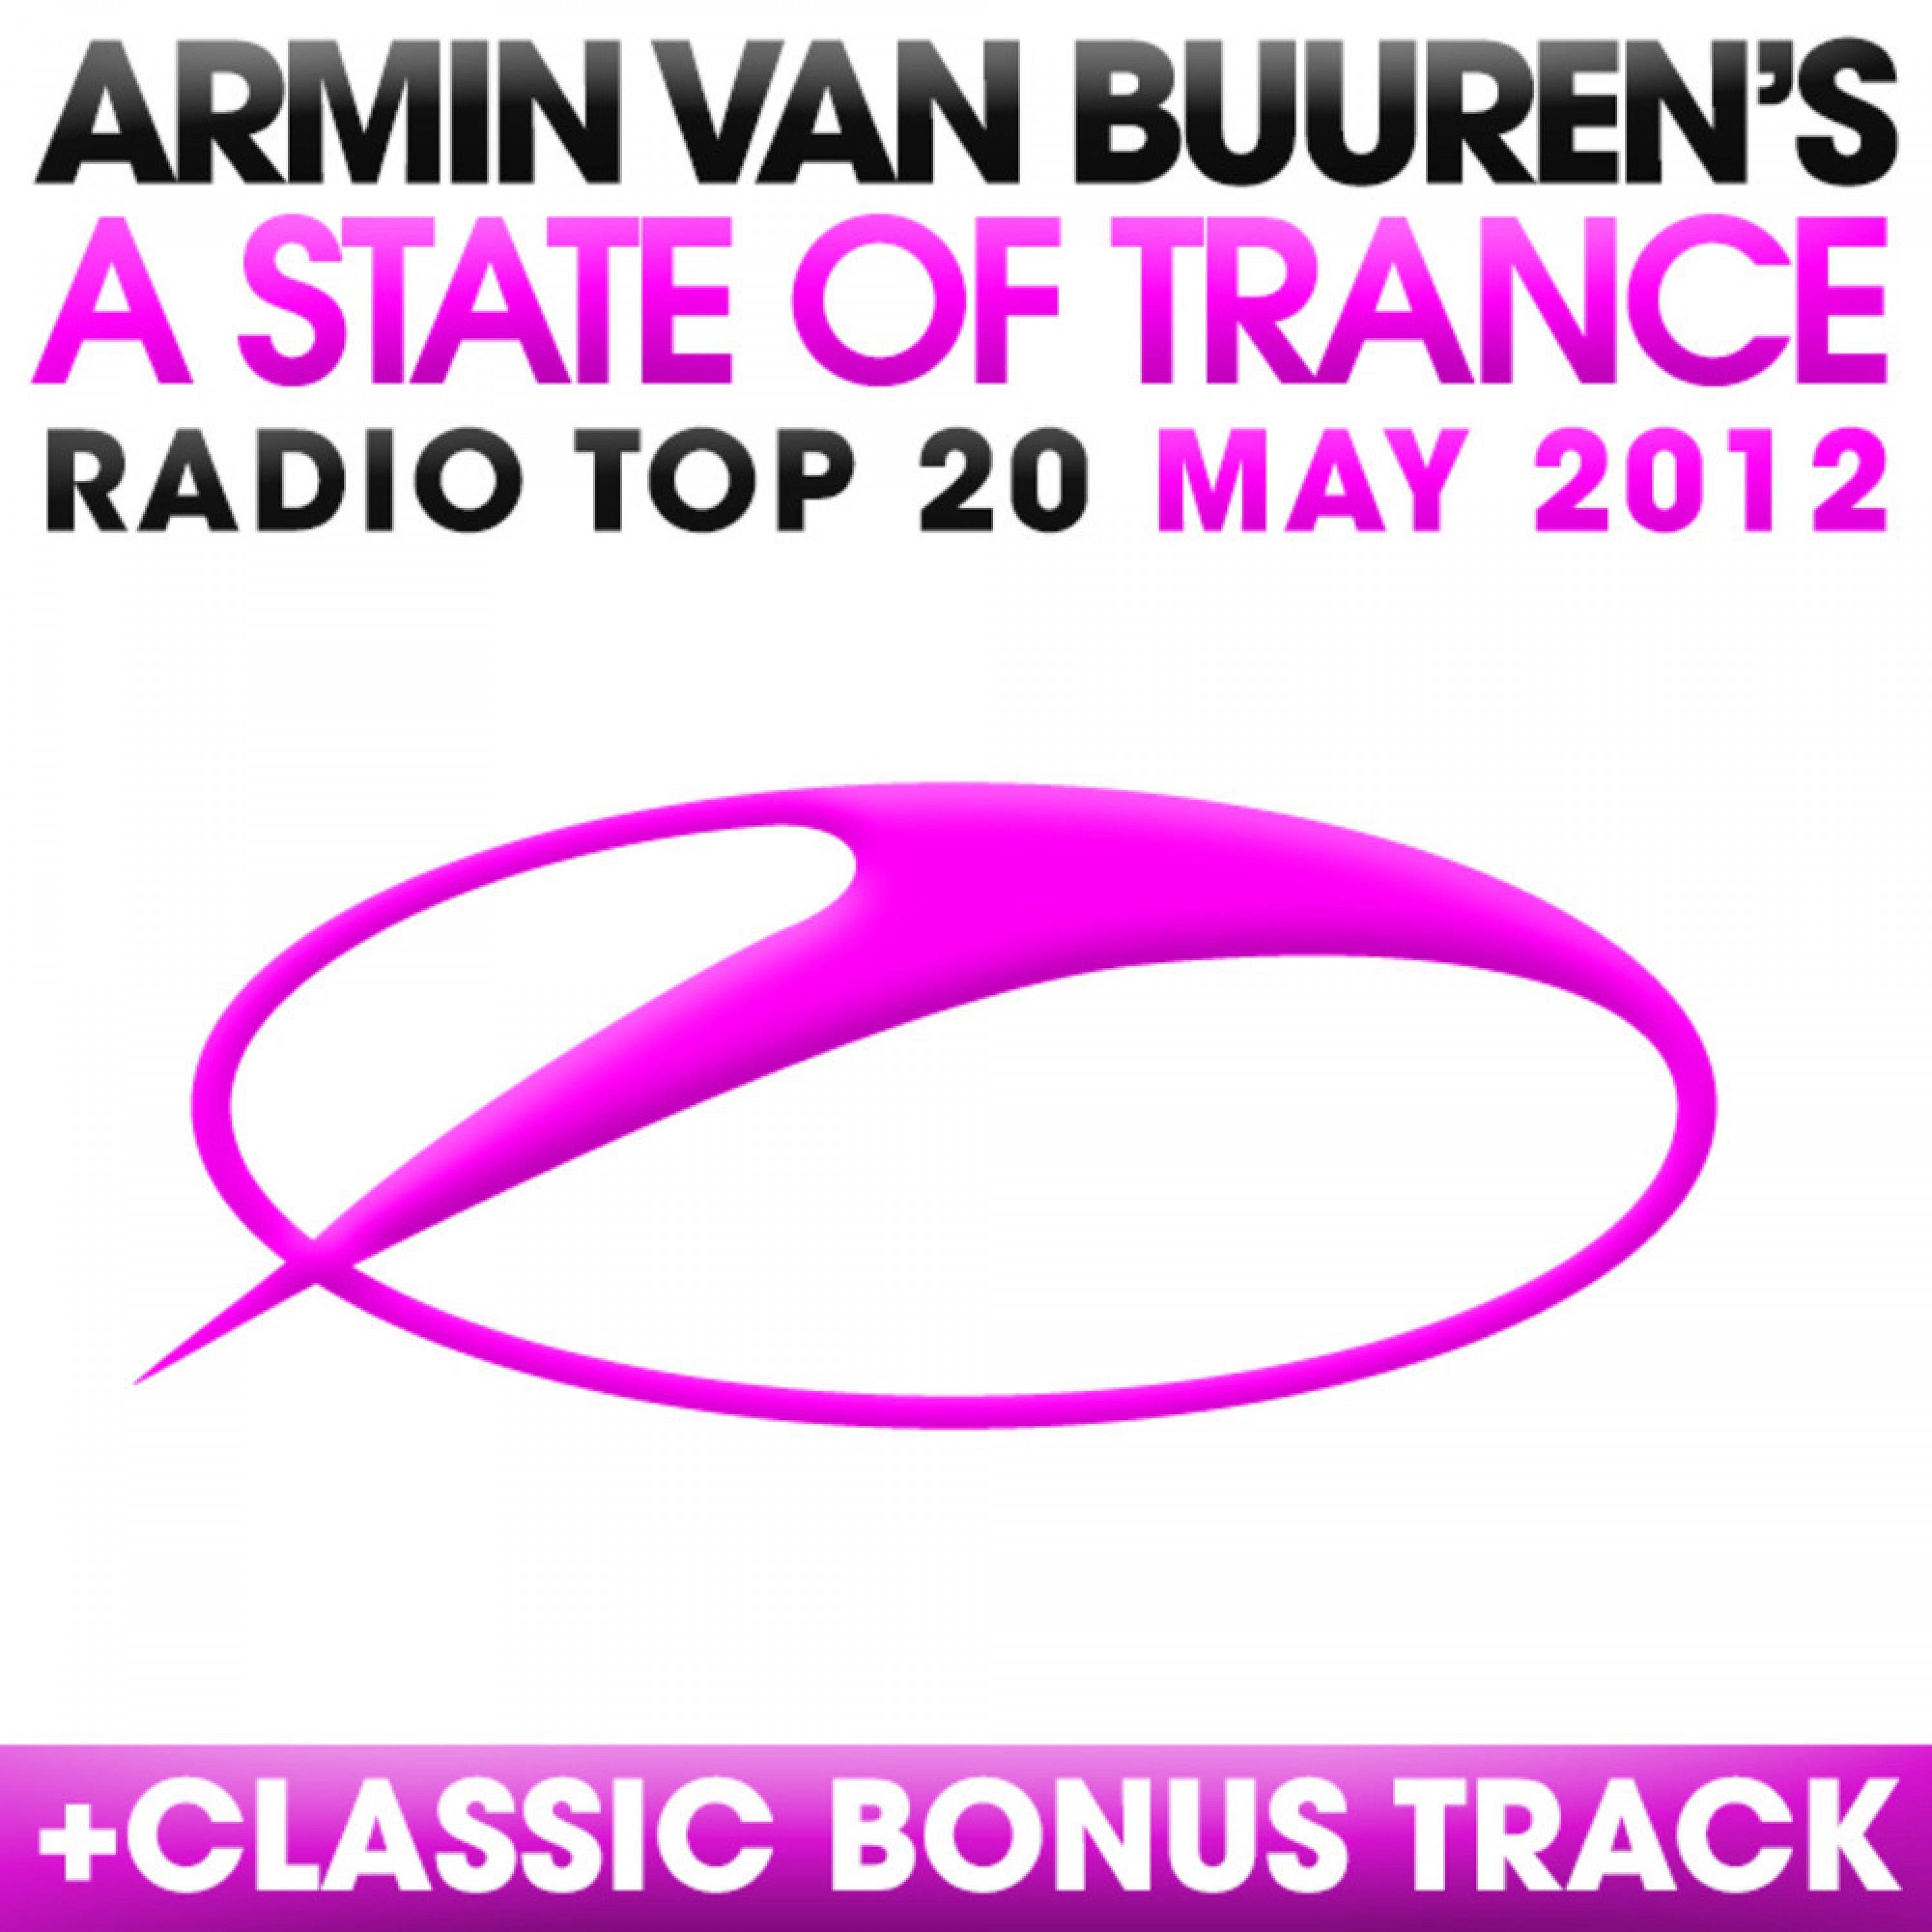 A State of Trance Radio Top 20 - May 2012专辑